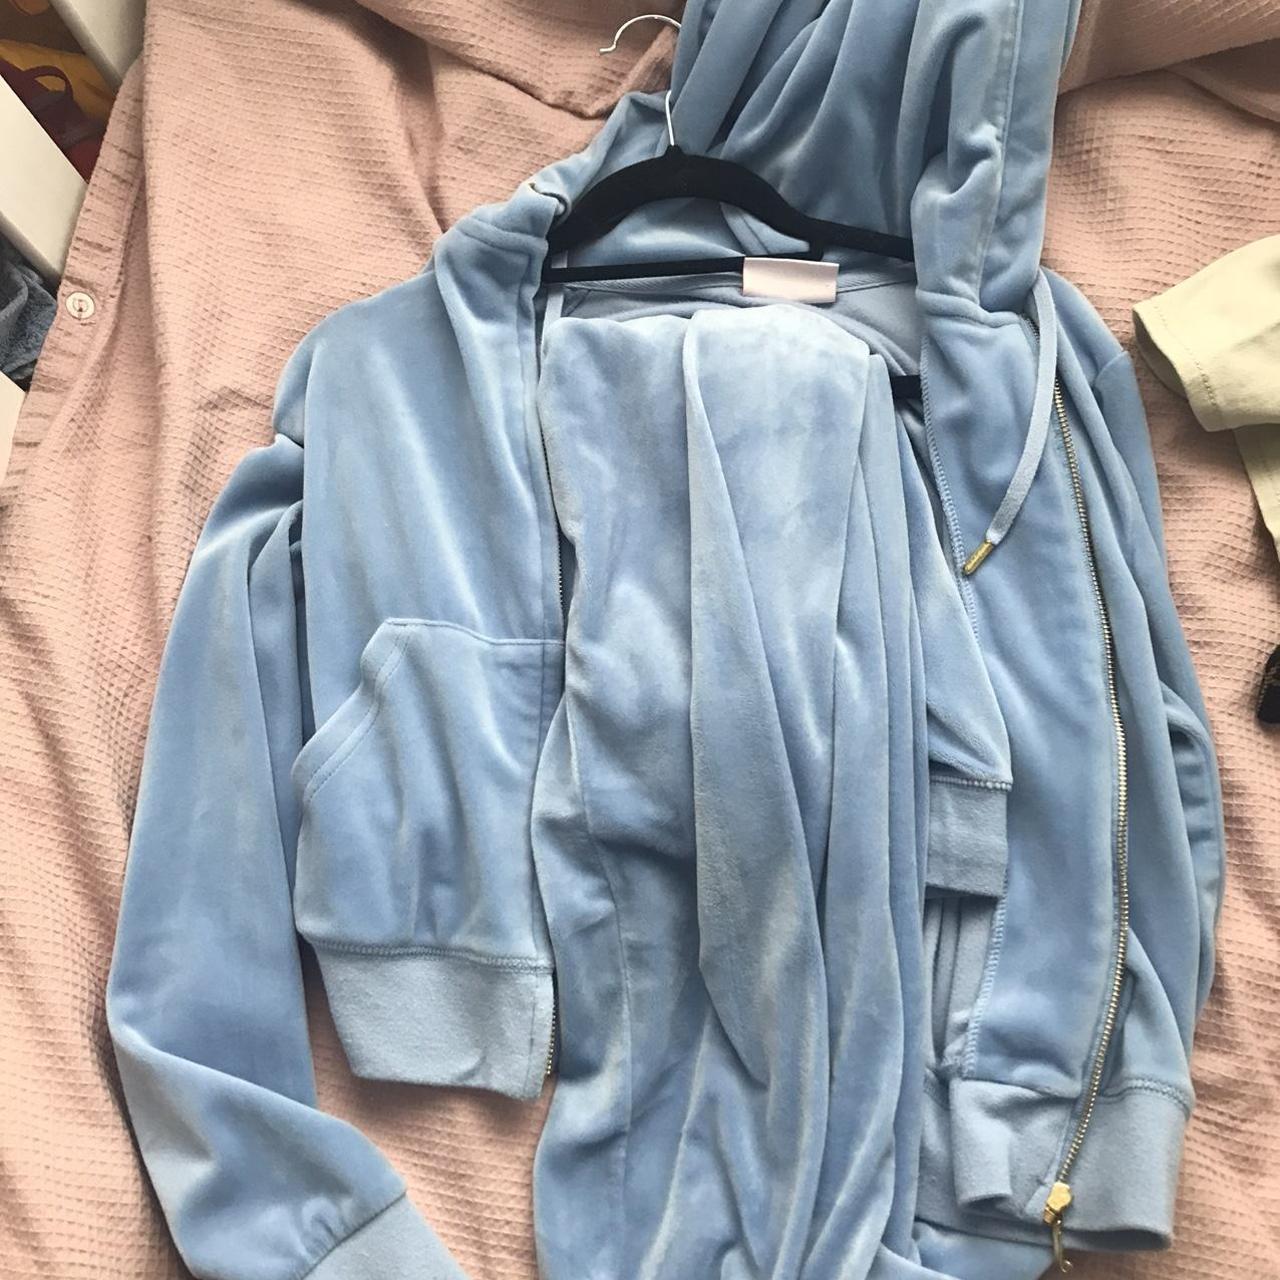 Juicy couture tracksuit. CAN BE SOLD SEPARATE (40... - Depop